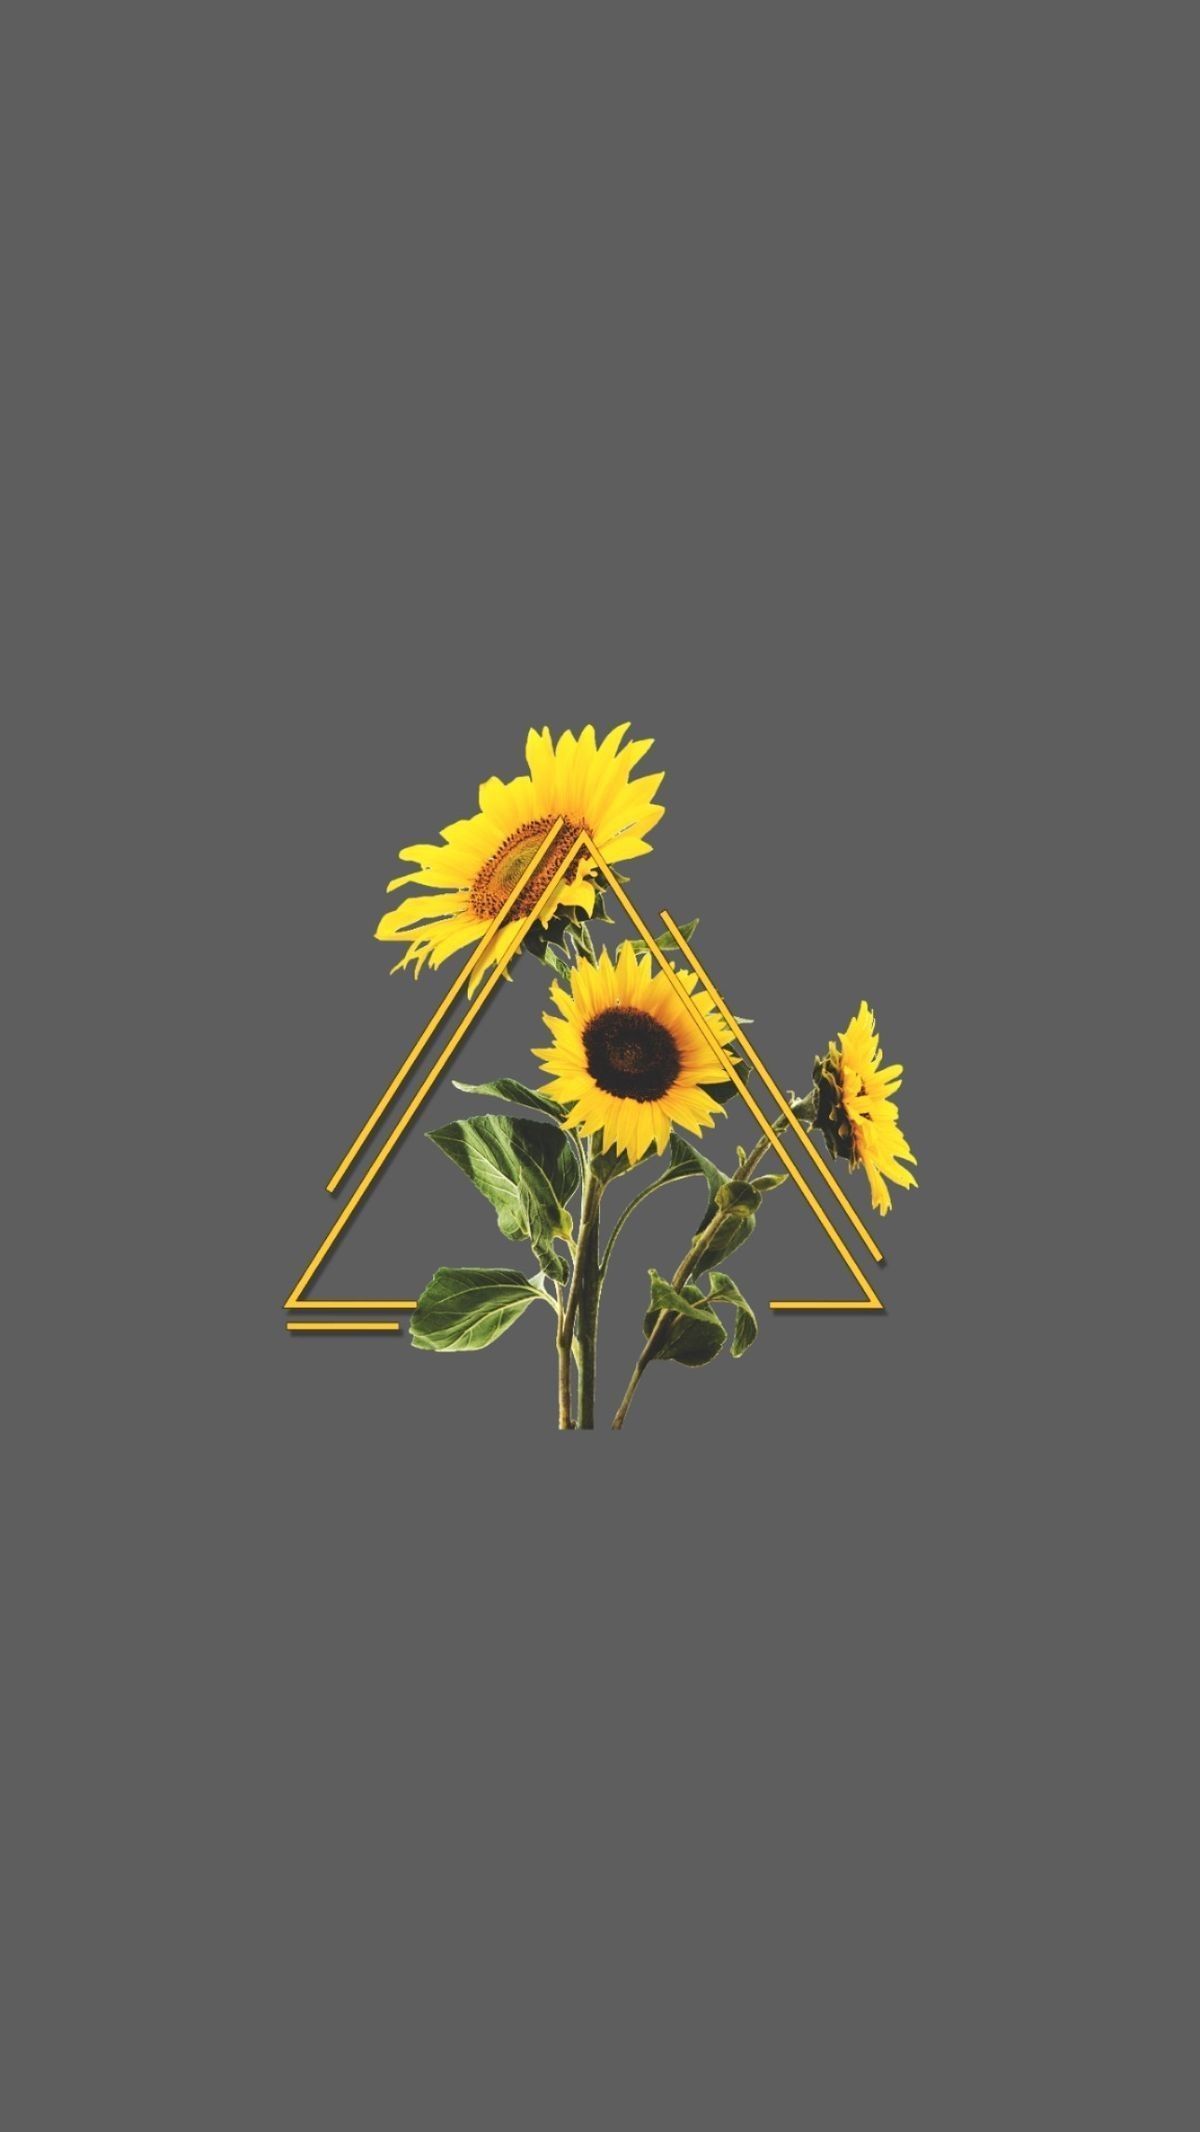 Aesthetic Sunflower Picture Wallpaper